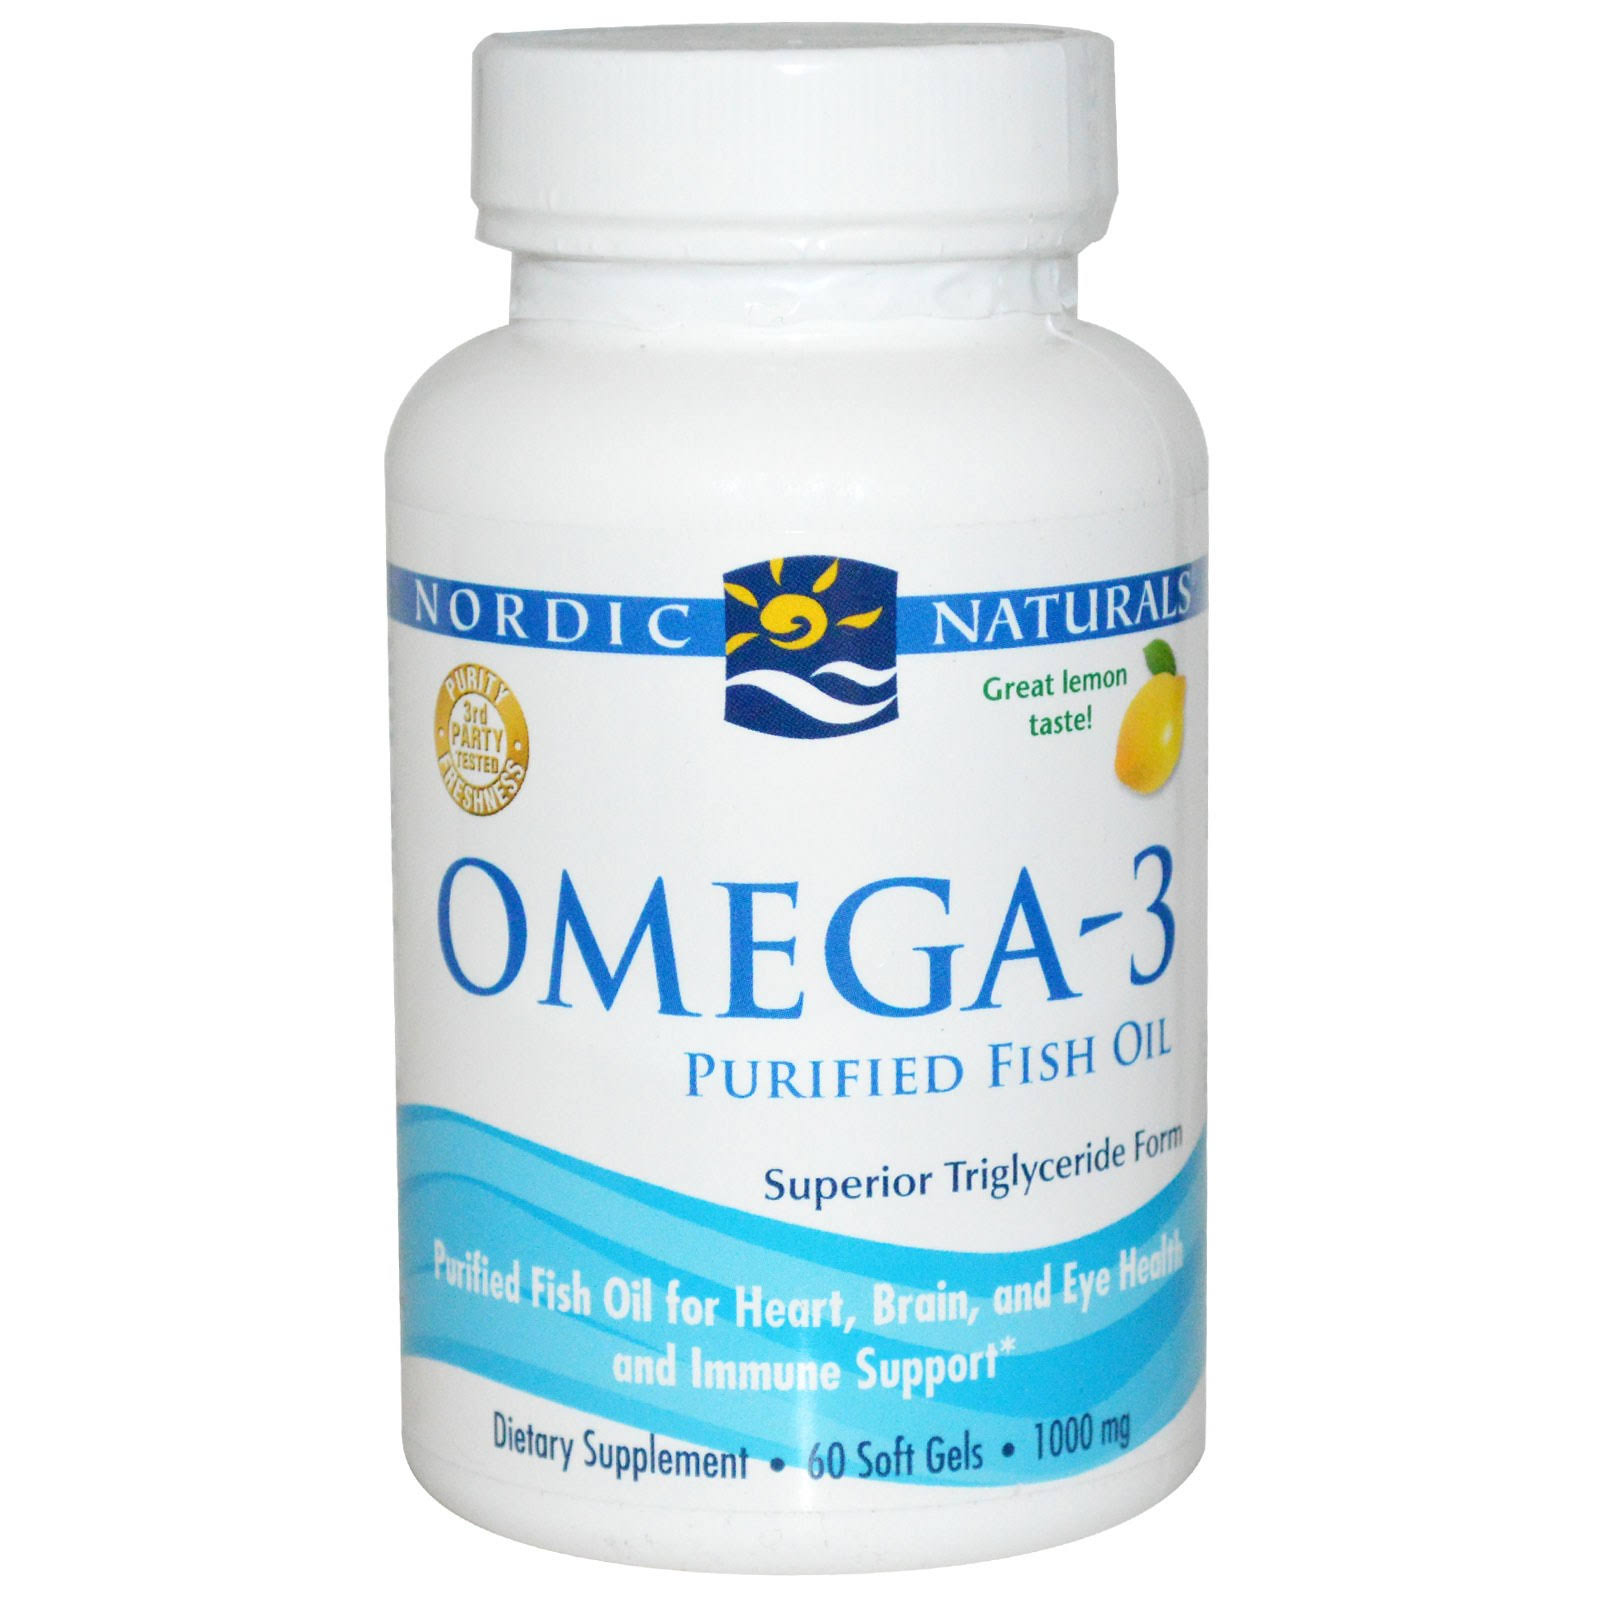 Nordic Naturals Omega-3 Purified Fish Oil